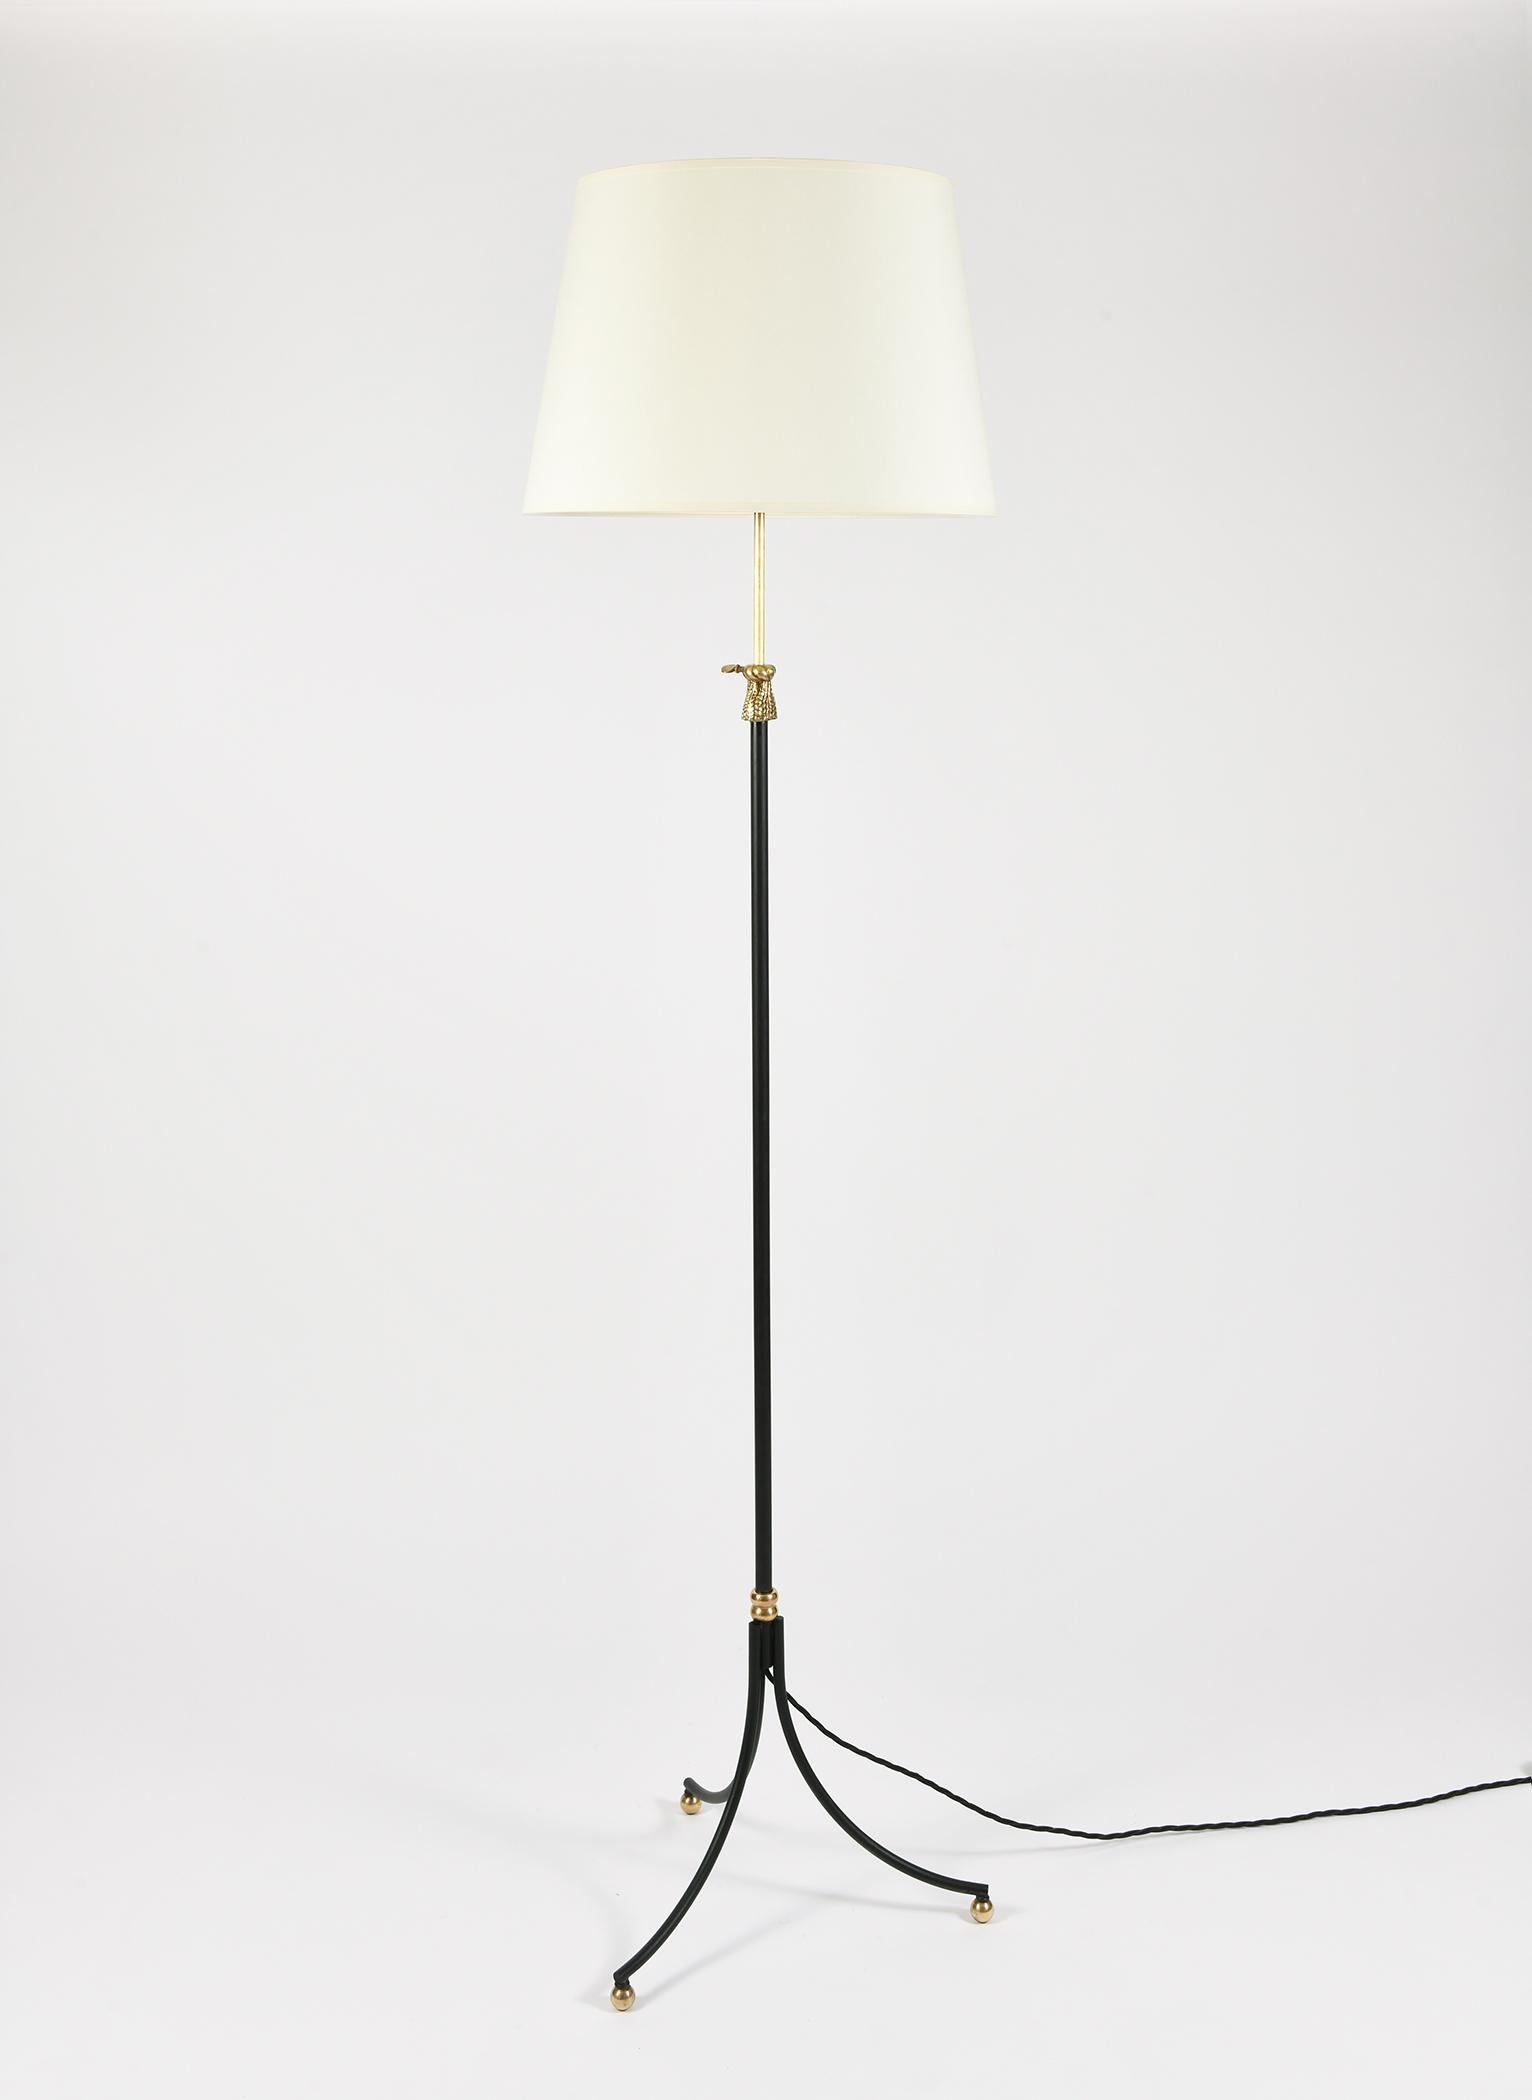 A brass and black enameled iron telescopic tripod floor lamp, with a tassel detail allowing the stem to be adjusted to the desired height.
With a bespoke lampshade.
France, circa 1950
The stated measurement include the shade and the height shown